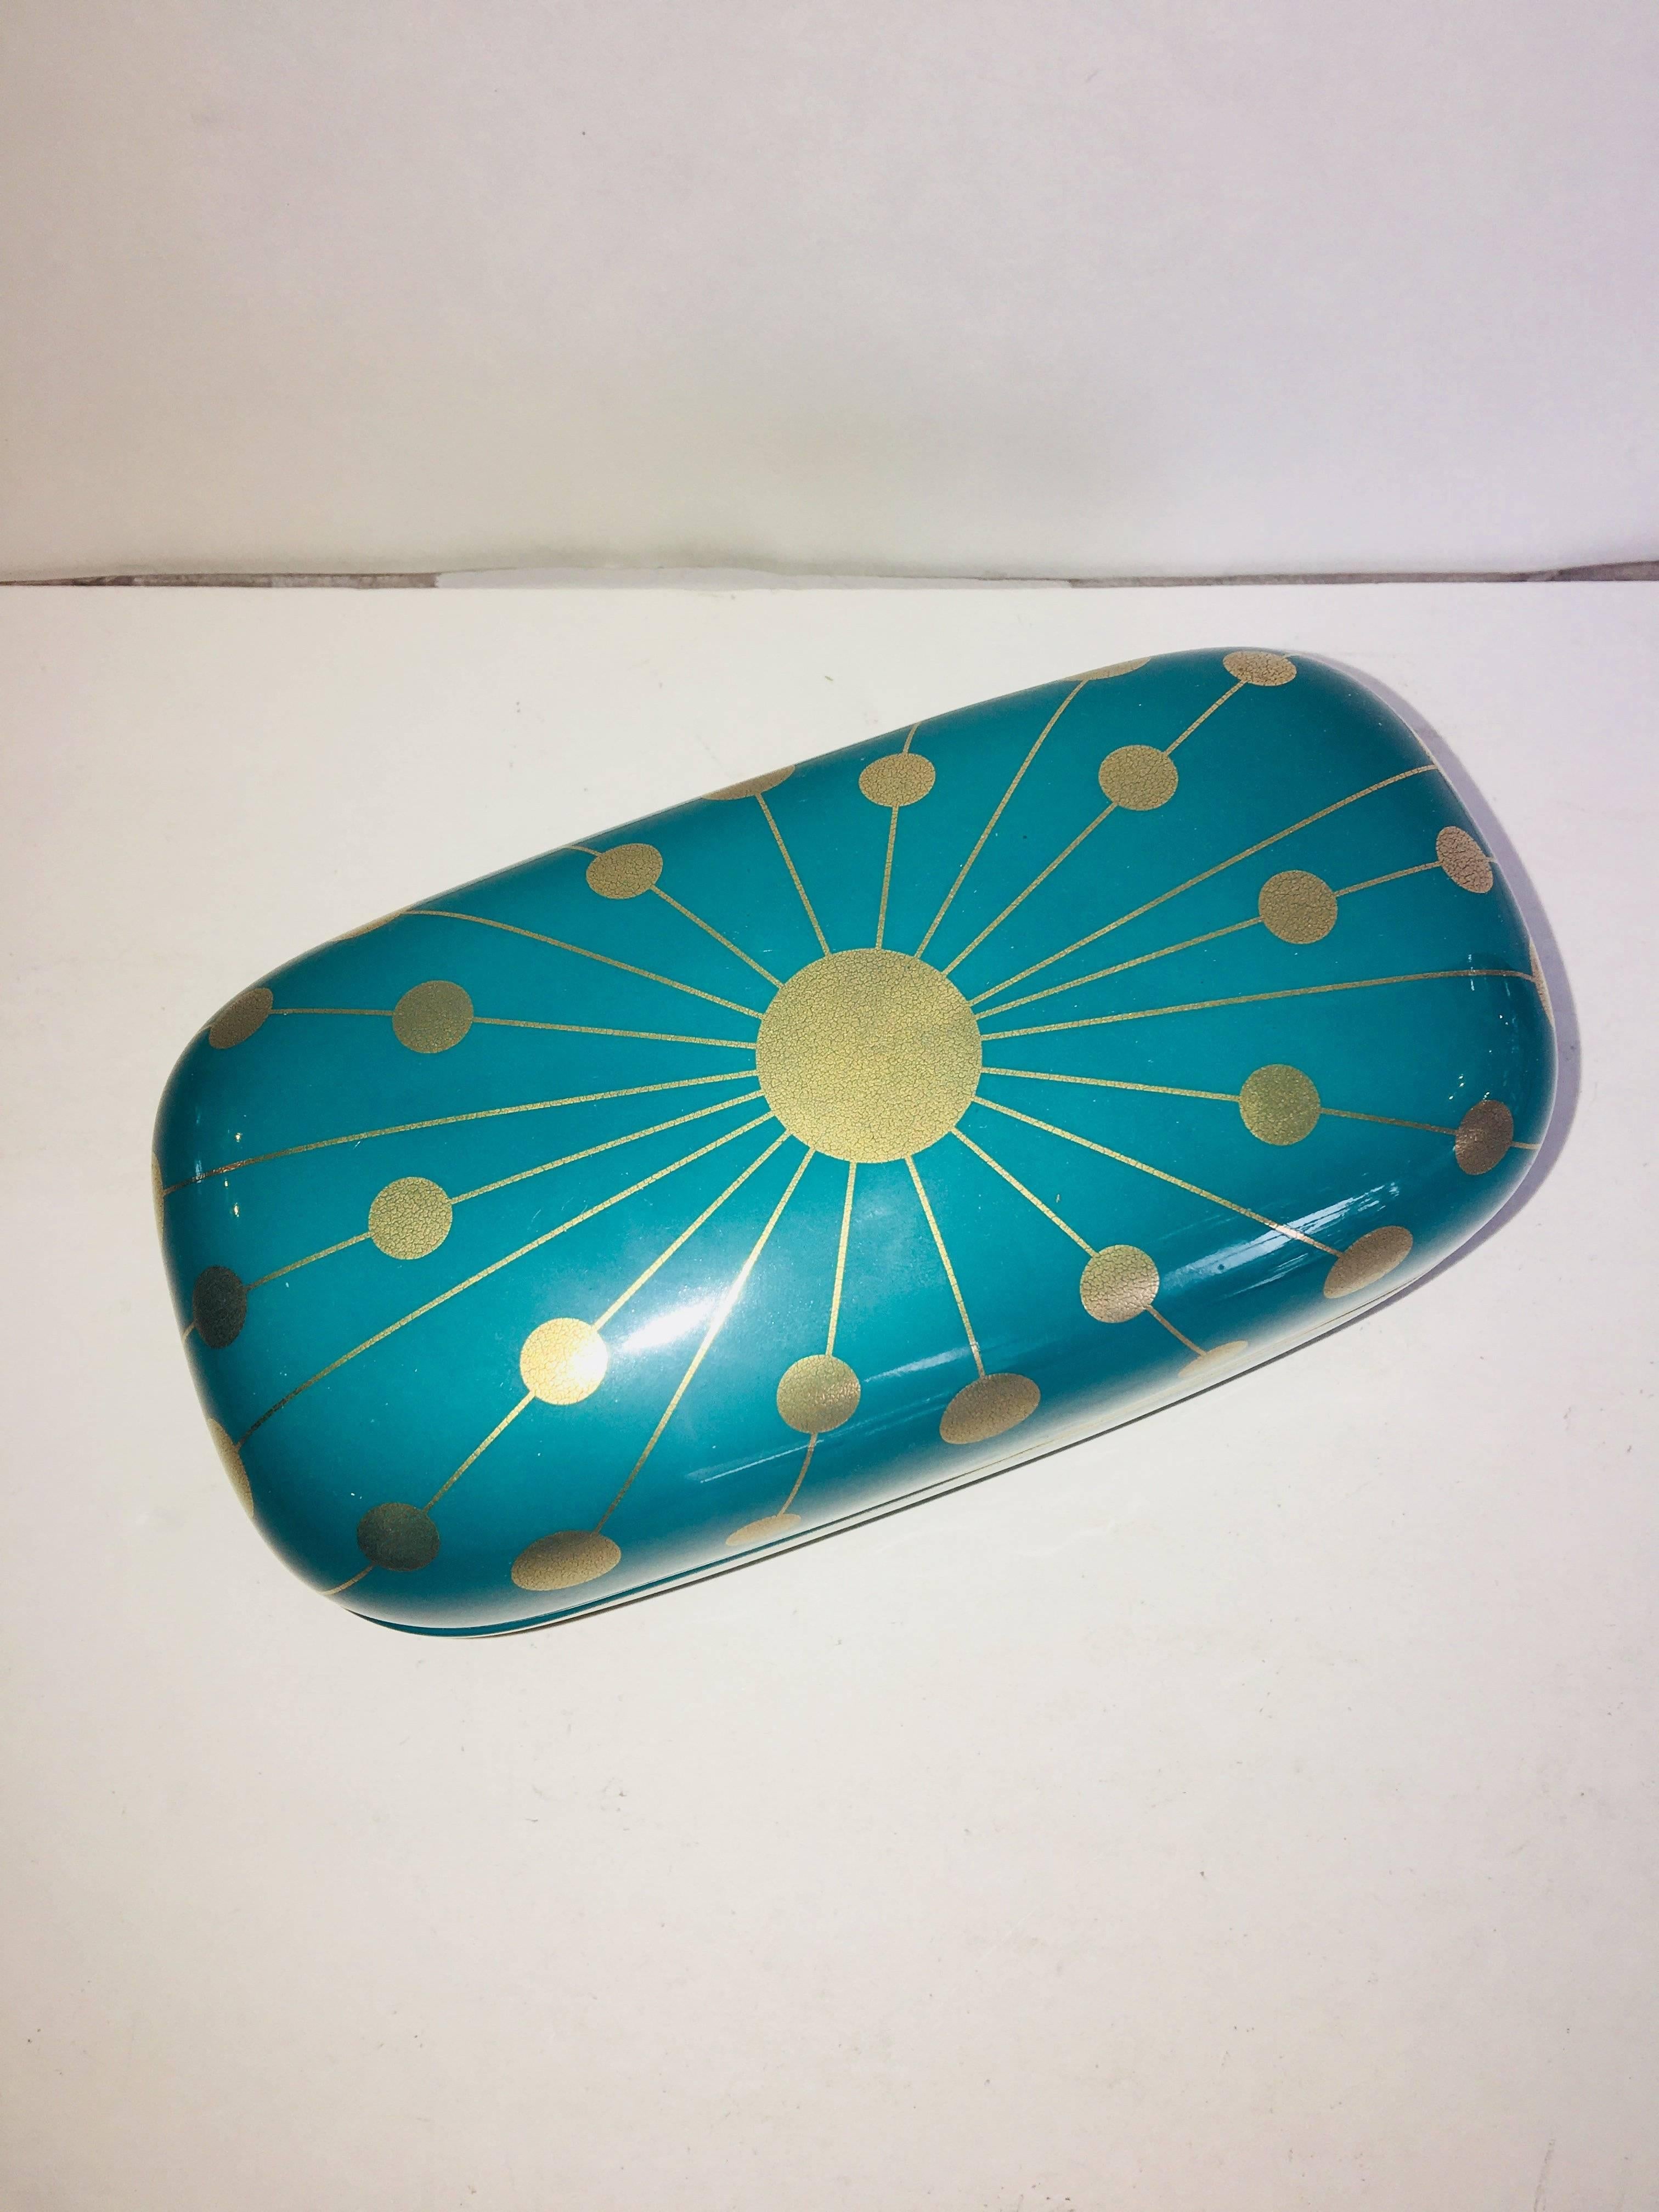 Jonathan Adler's signature approach to design is instantly recognizable, combining vintage influences with a modern freshness. This porcelain box offers chic storage for small trinkets. The pure gold design stands out against the rich turquoise